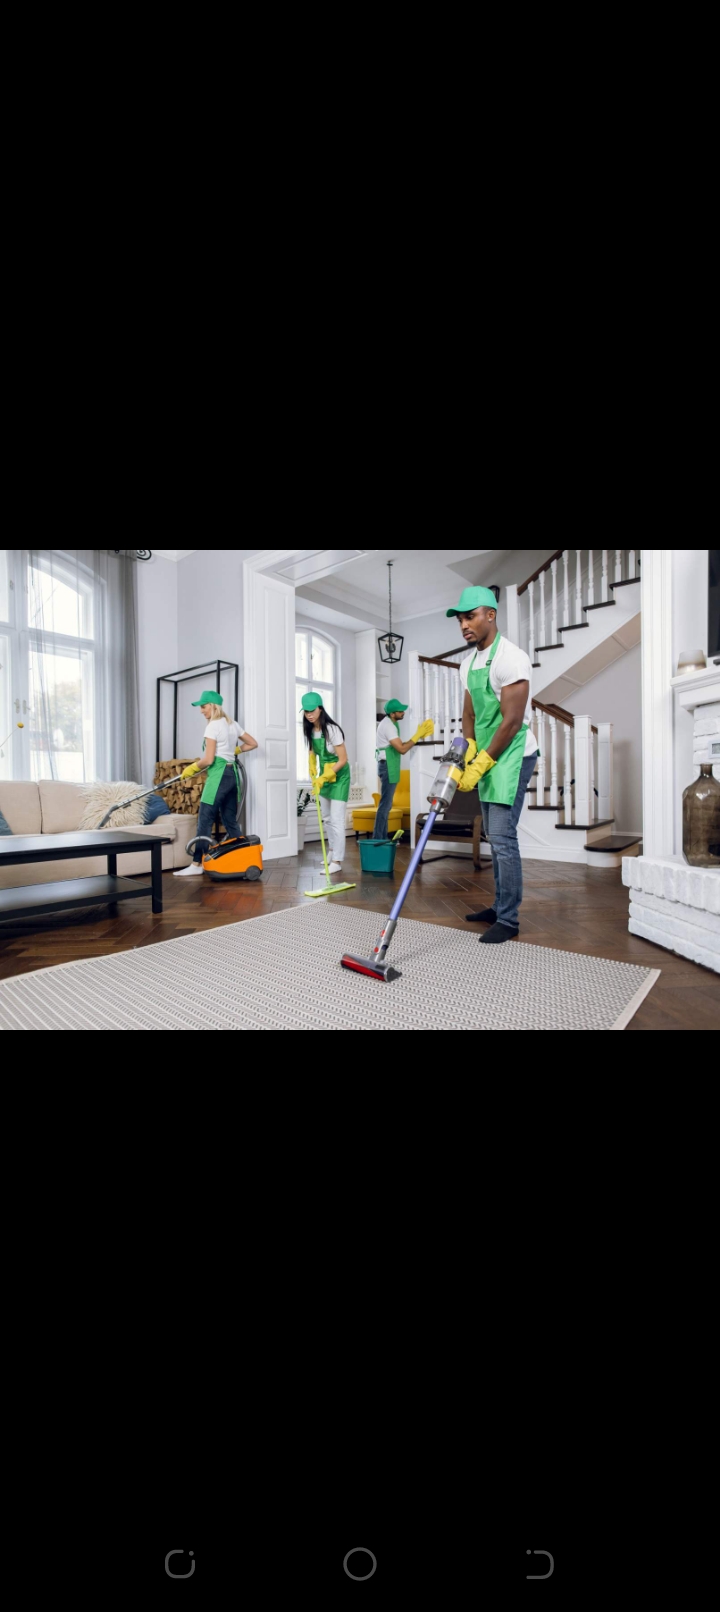 Cleaning services picture